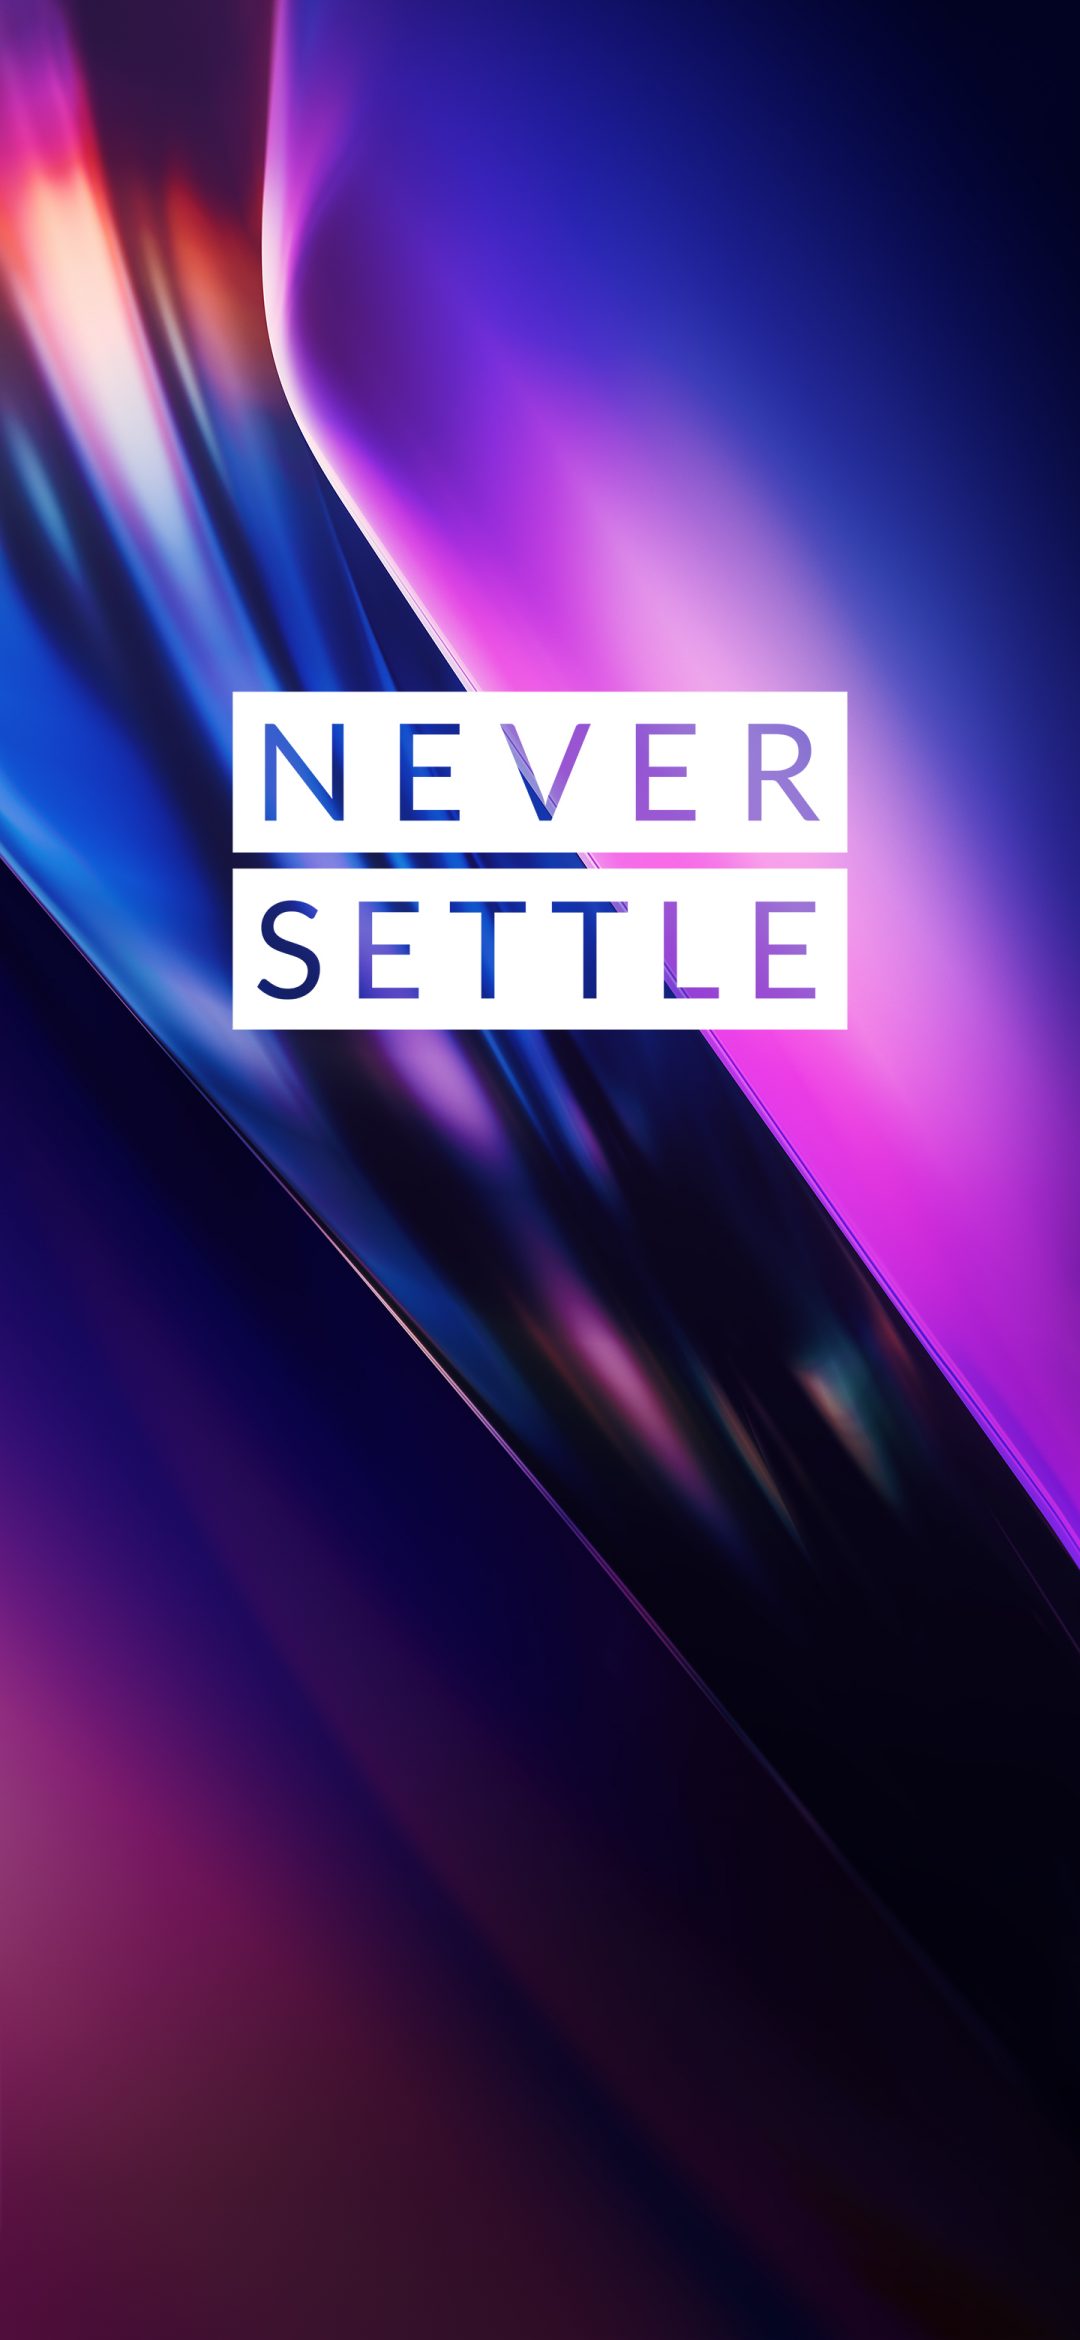 OnePlus 7T Wallpapers & Live Wallpapers (4K, Never Settle) - DroidViews